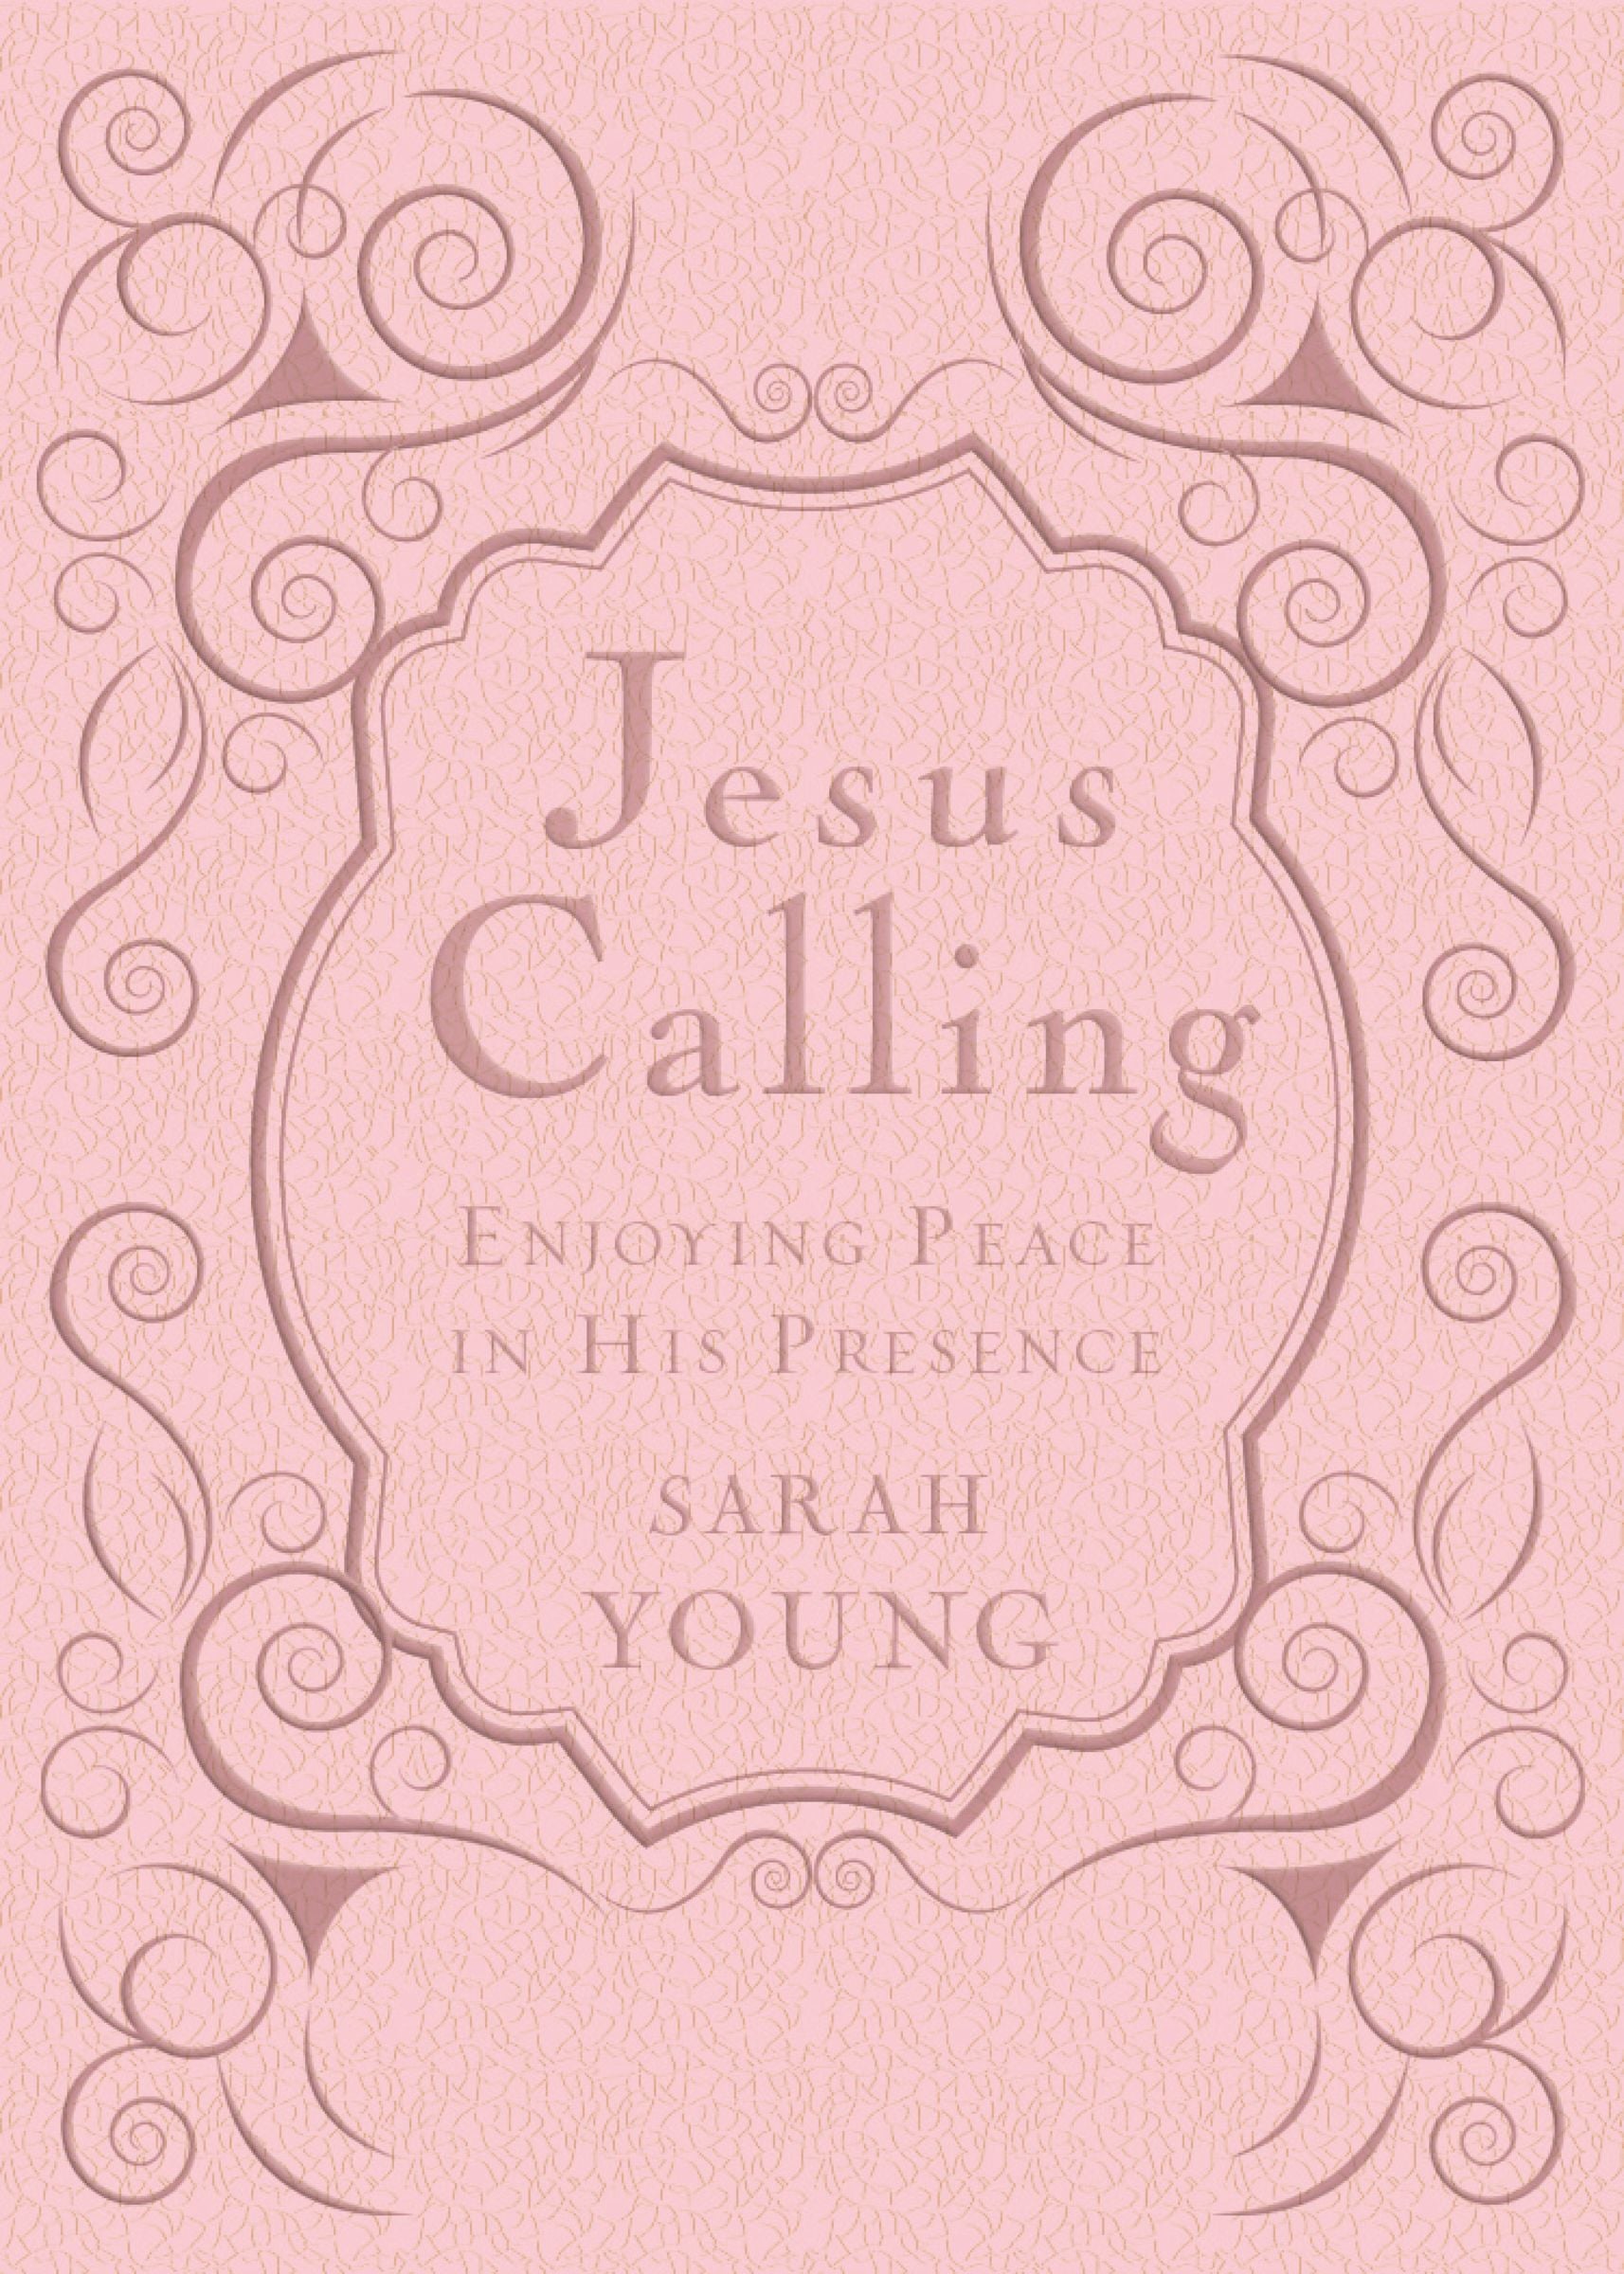 Jesus Calling - Deluxe Edition Pink Cover: Enjoying Peace In His Presence